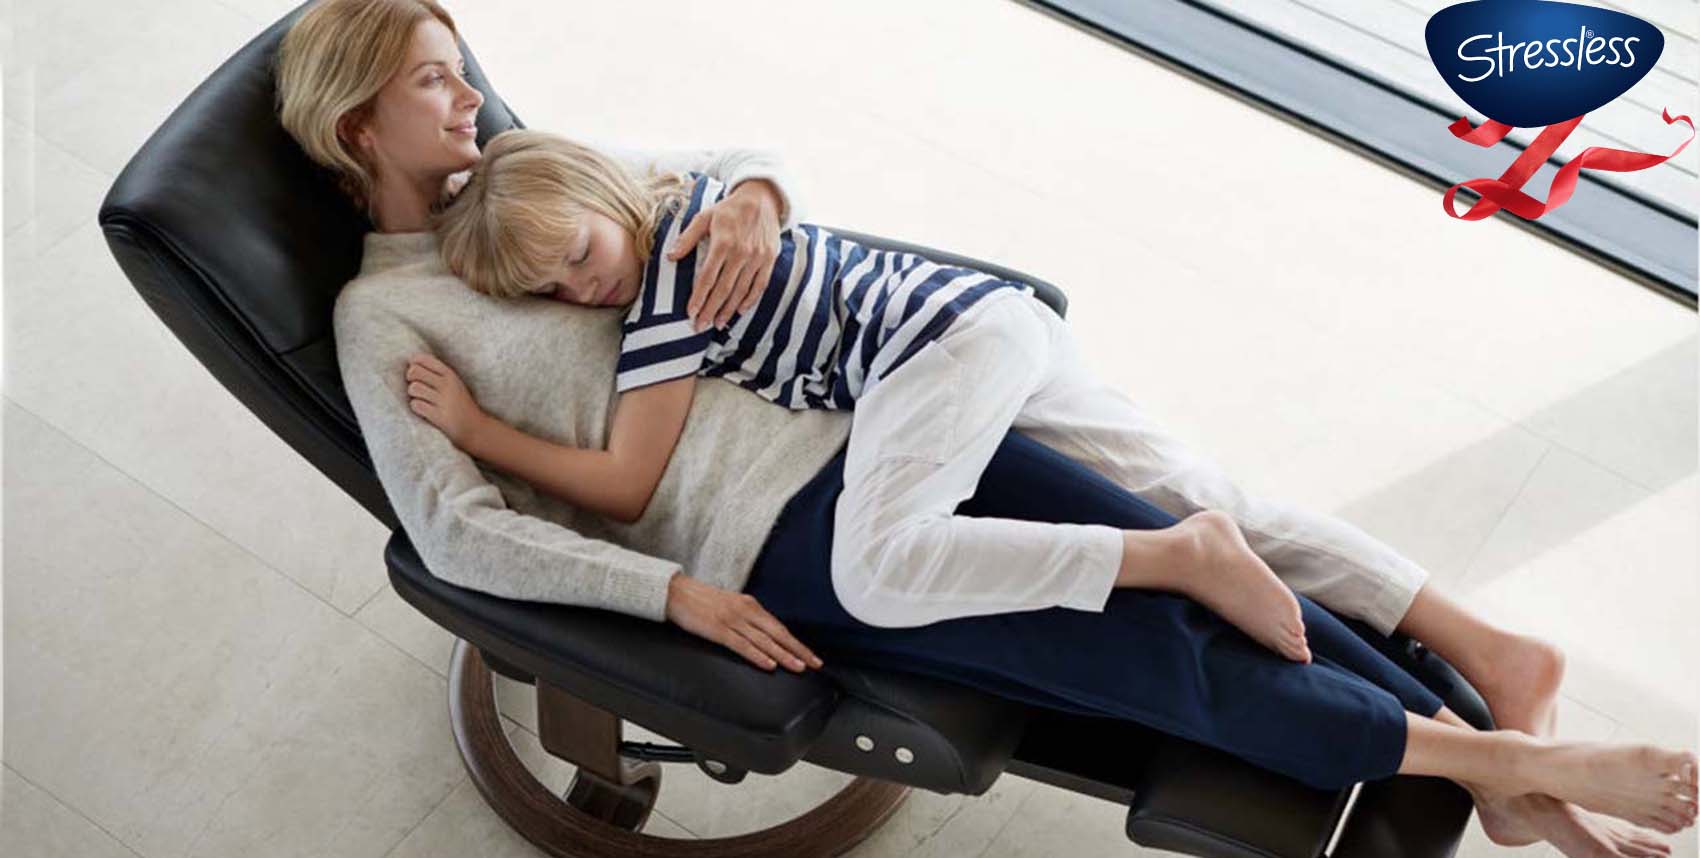 stressless legcomfort base with mother and child